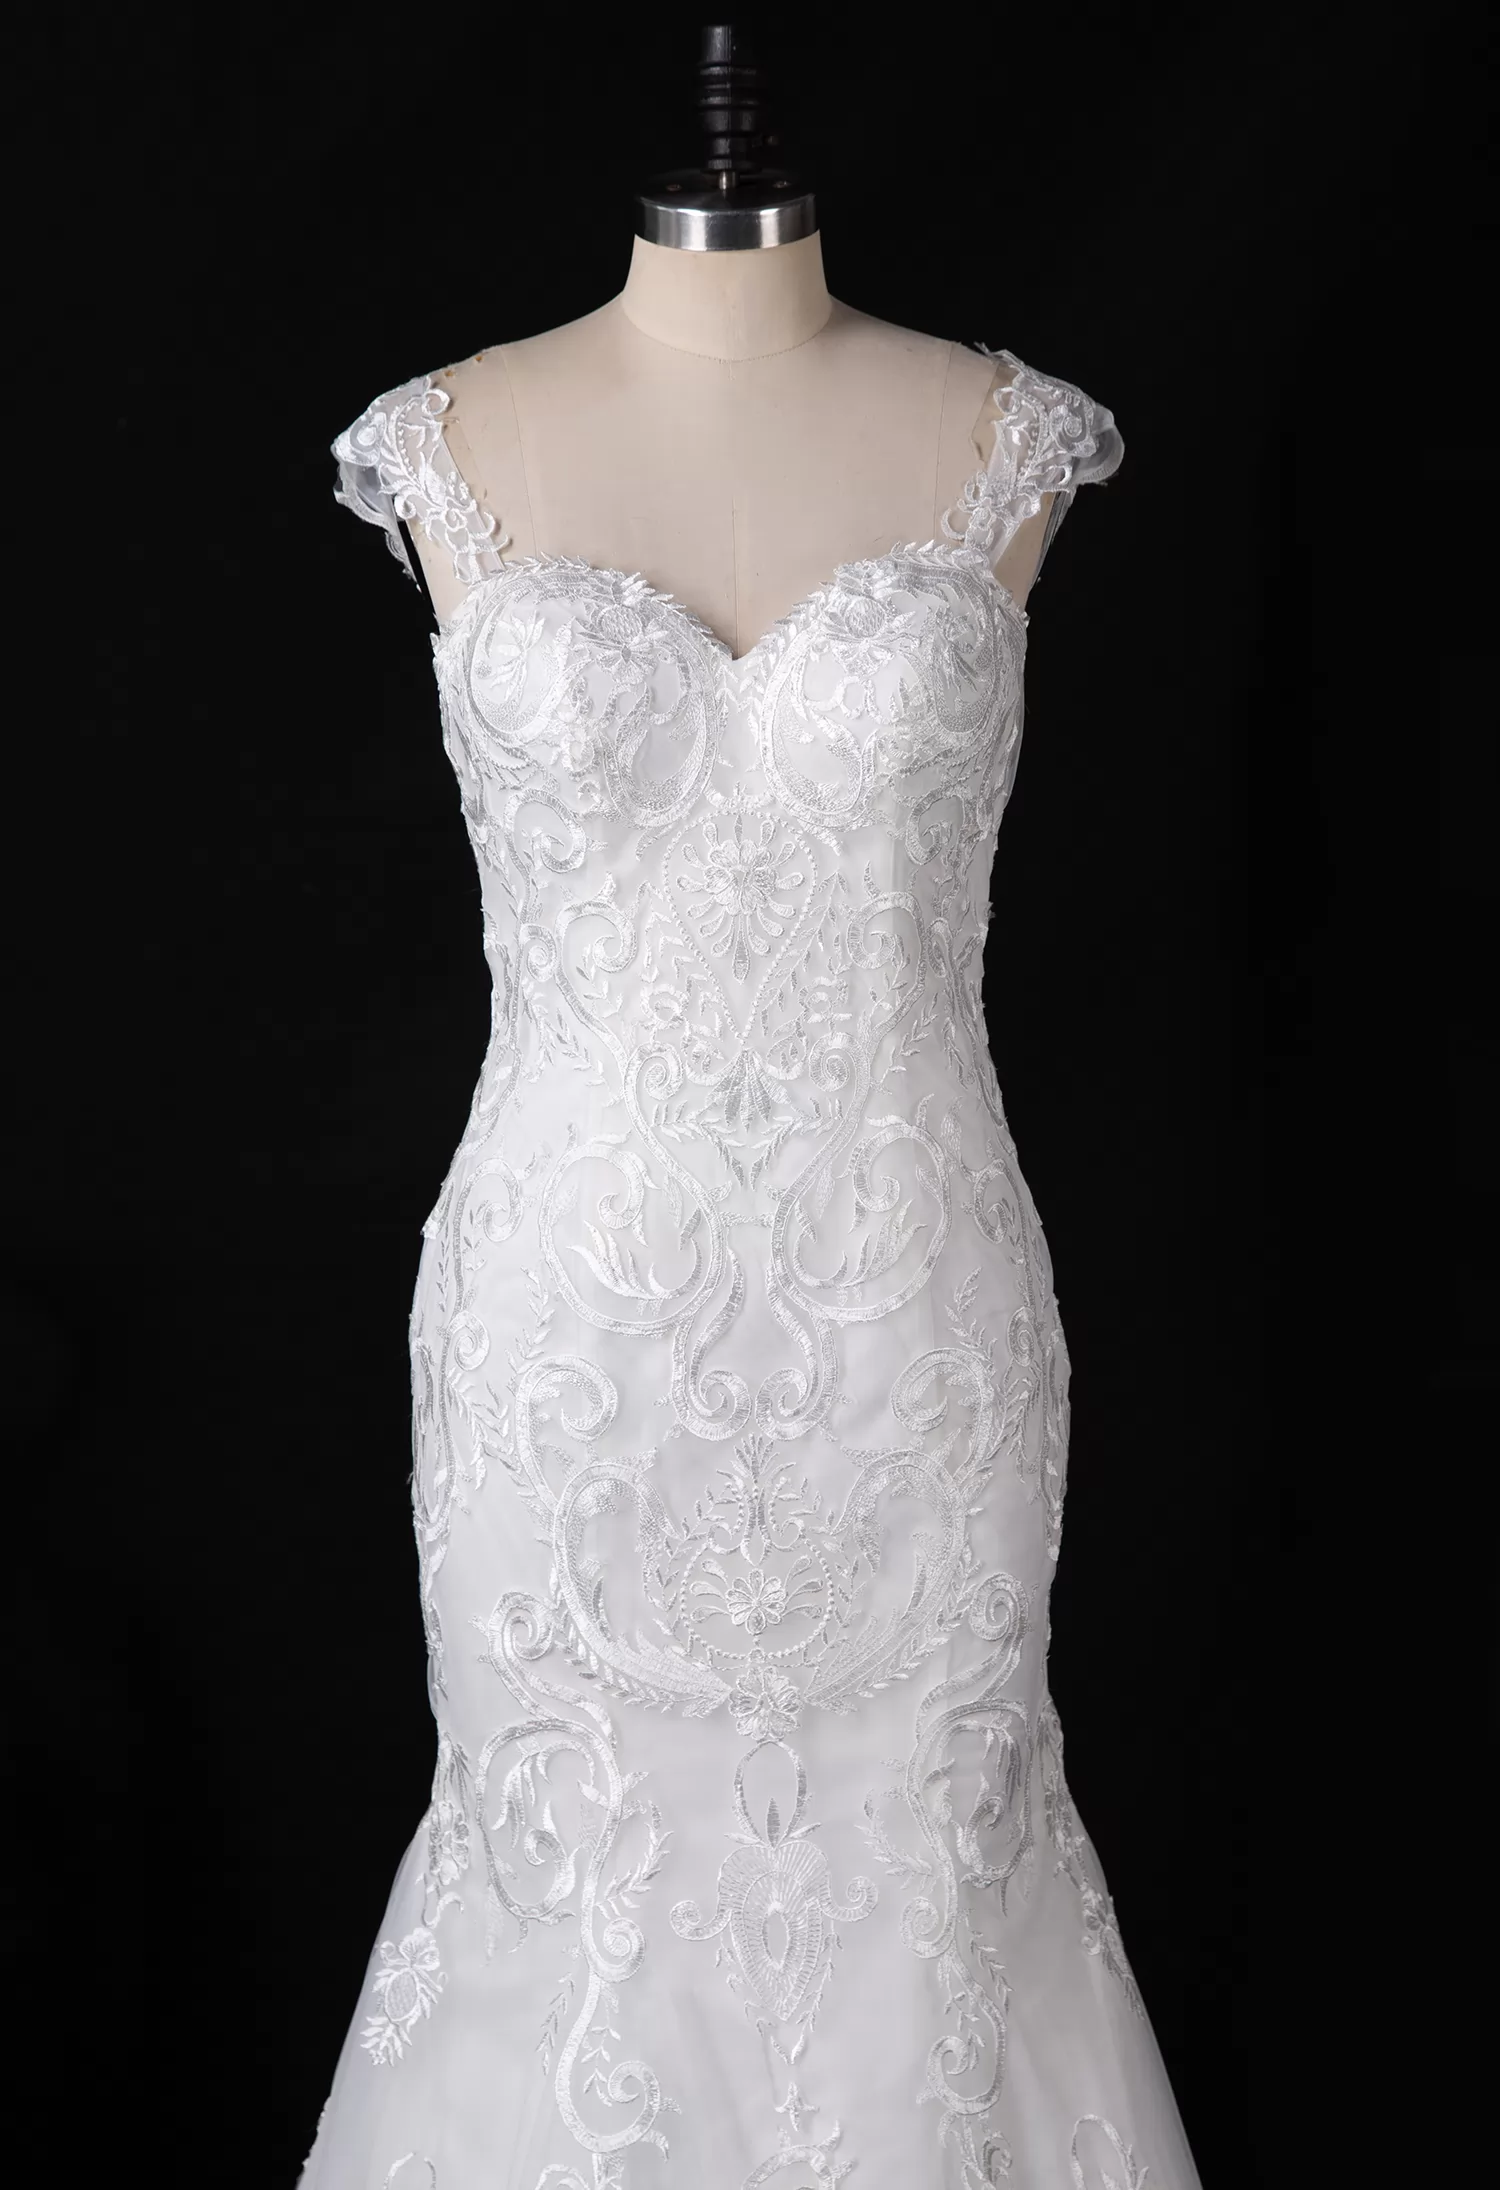 Mermaid Wedding Dress With Scalloped Lace Train